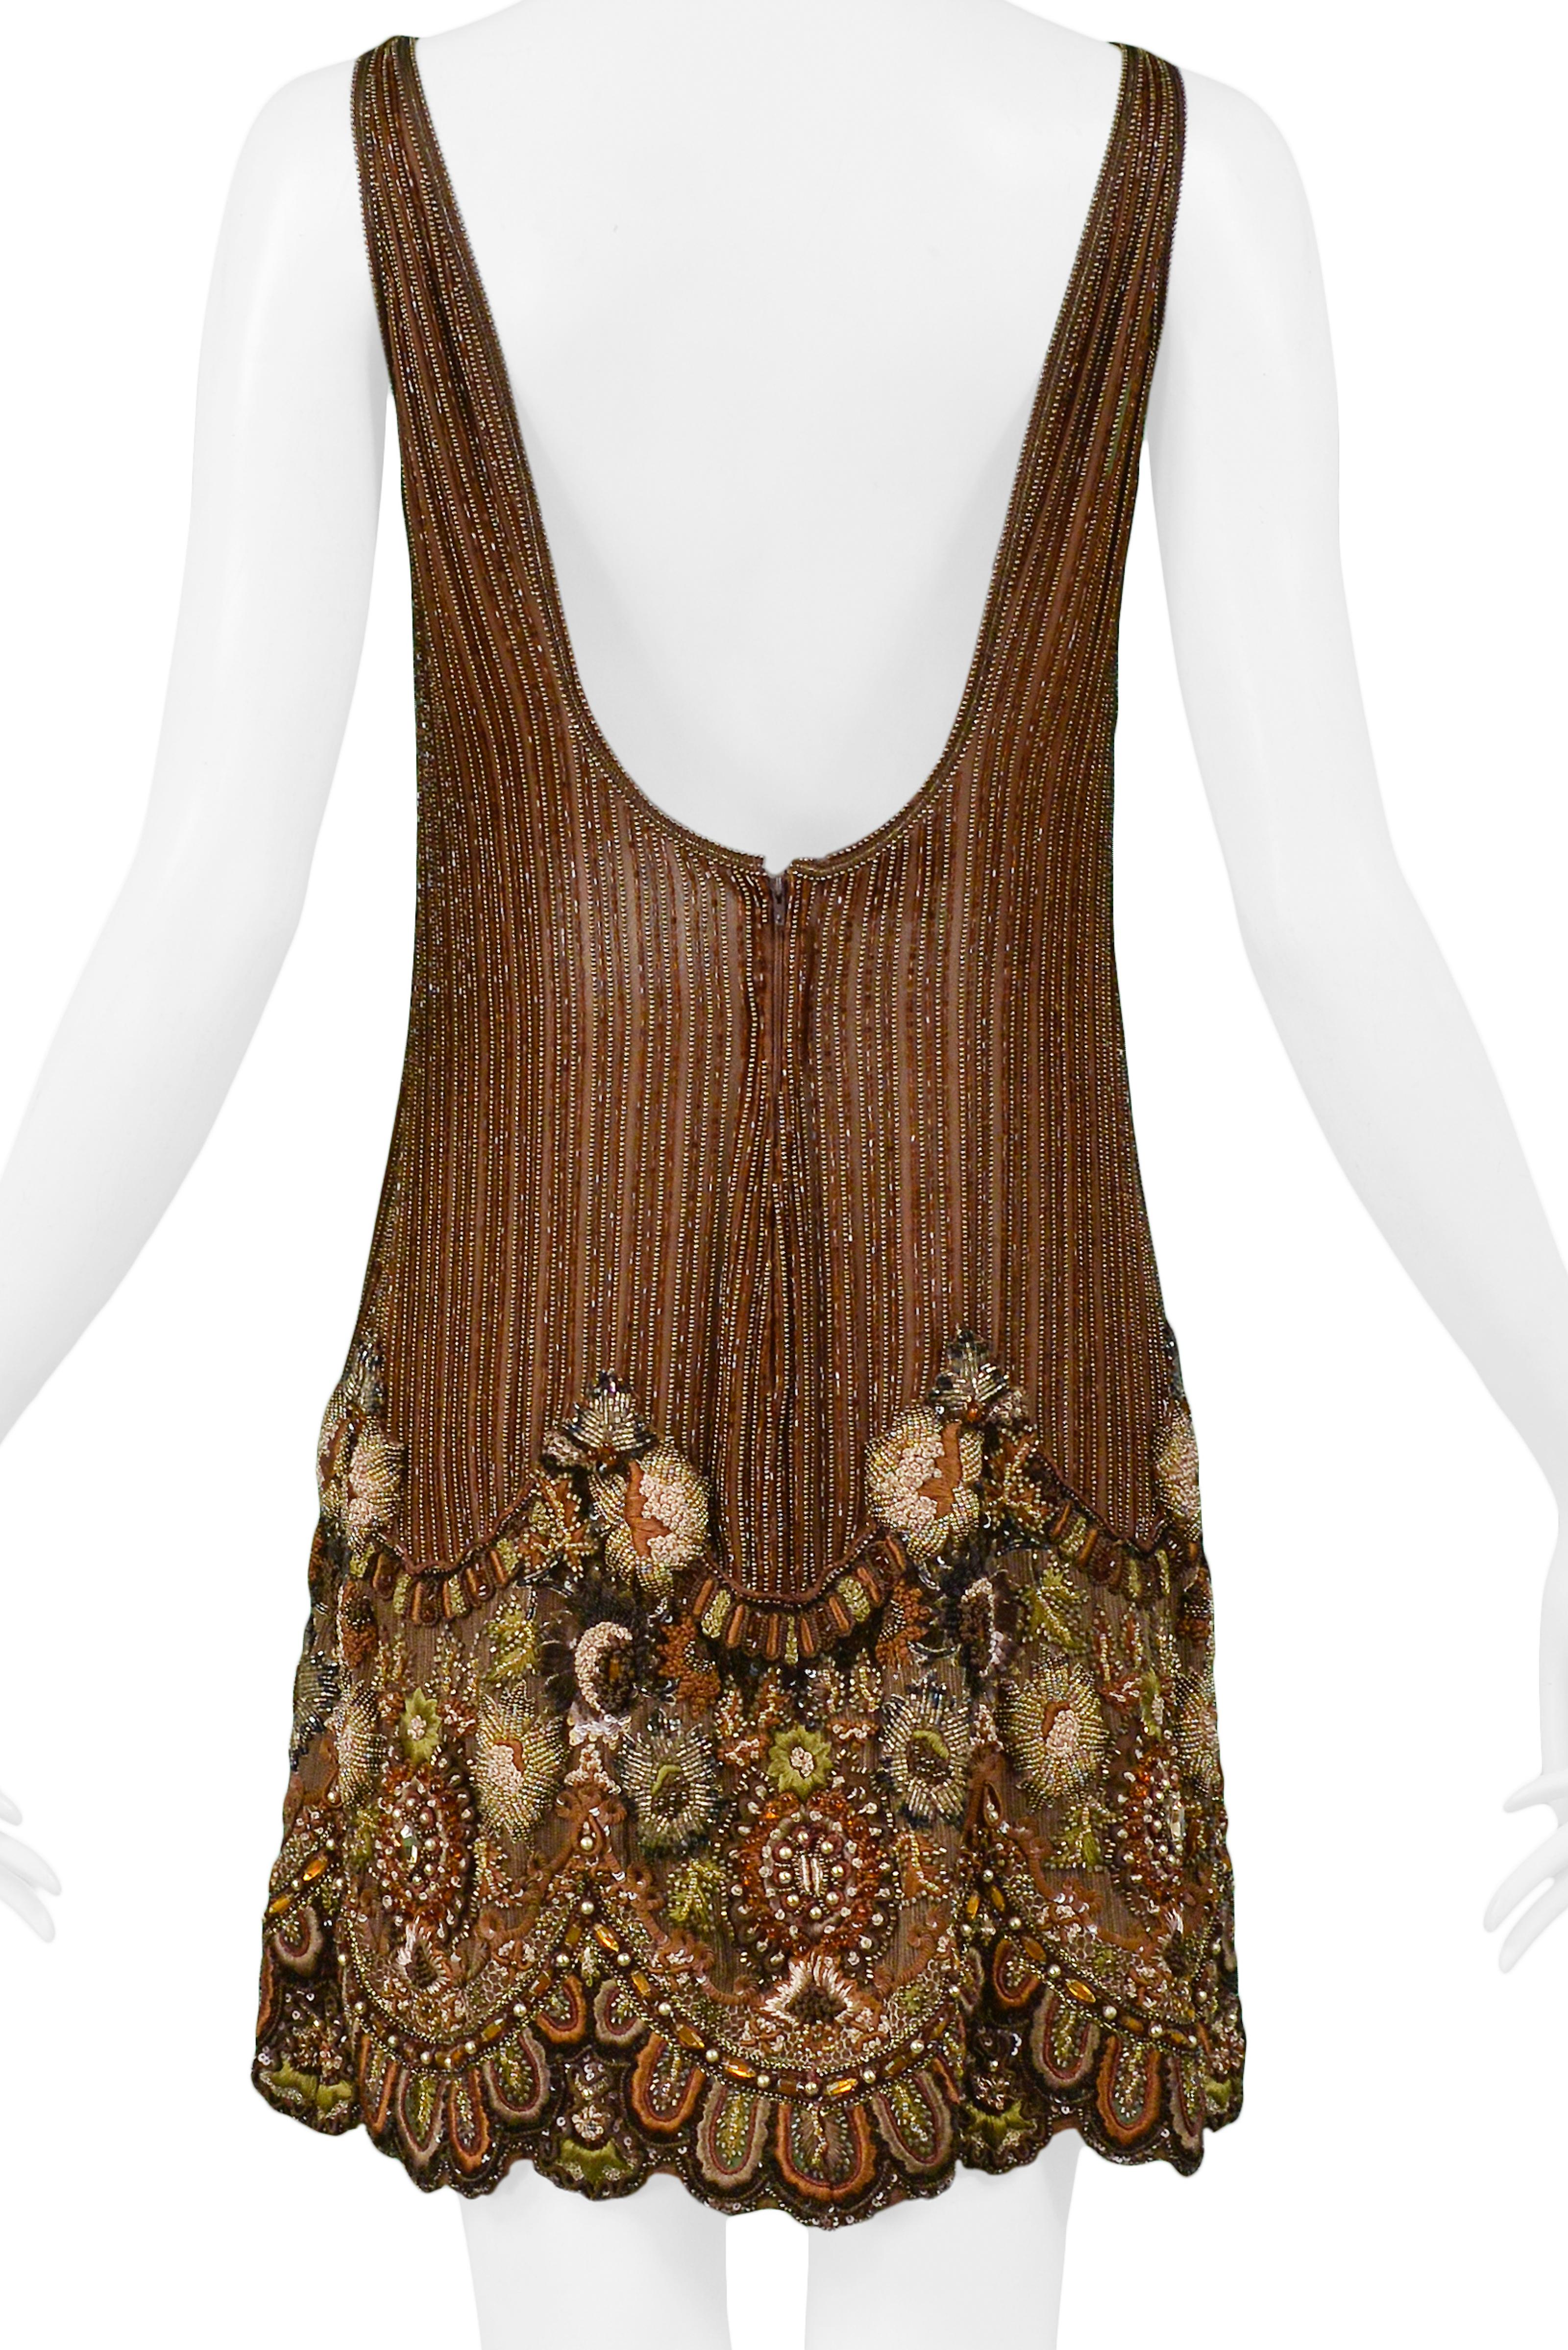 Vintage Valentino Heavily Beaded Floral Mini Dress In Excellent Condition For Sale In Los Angeles, CA